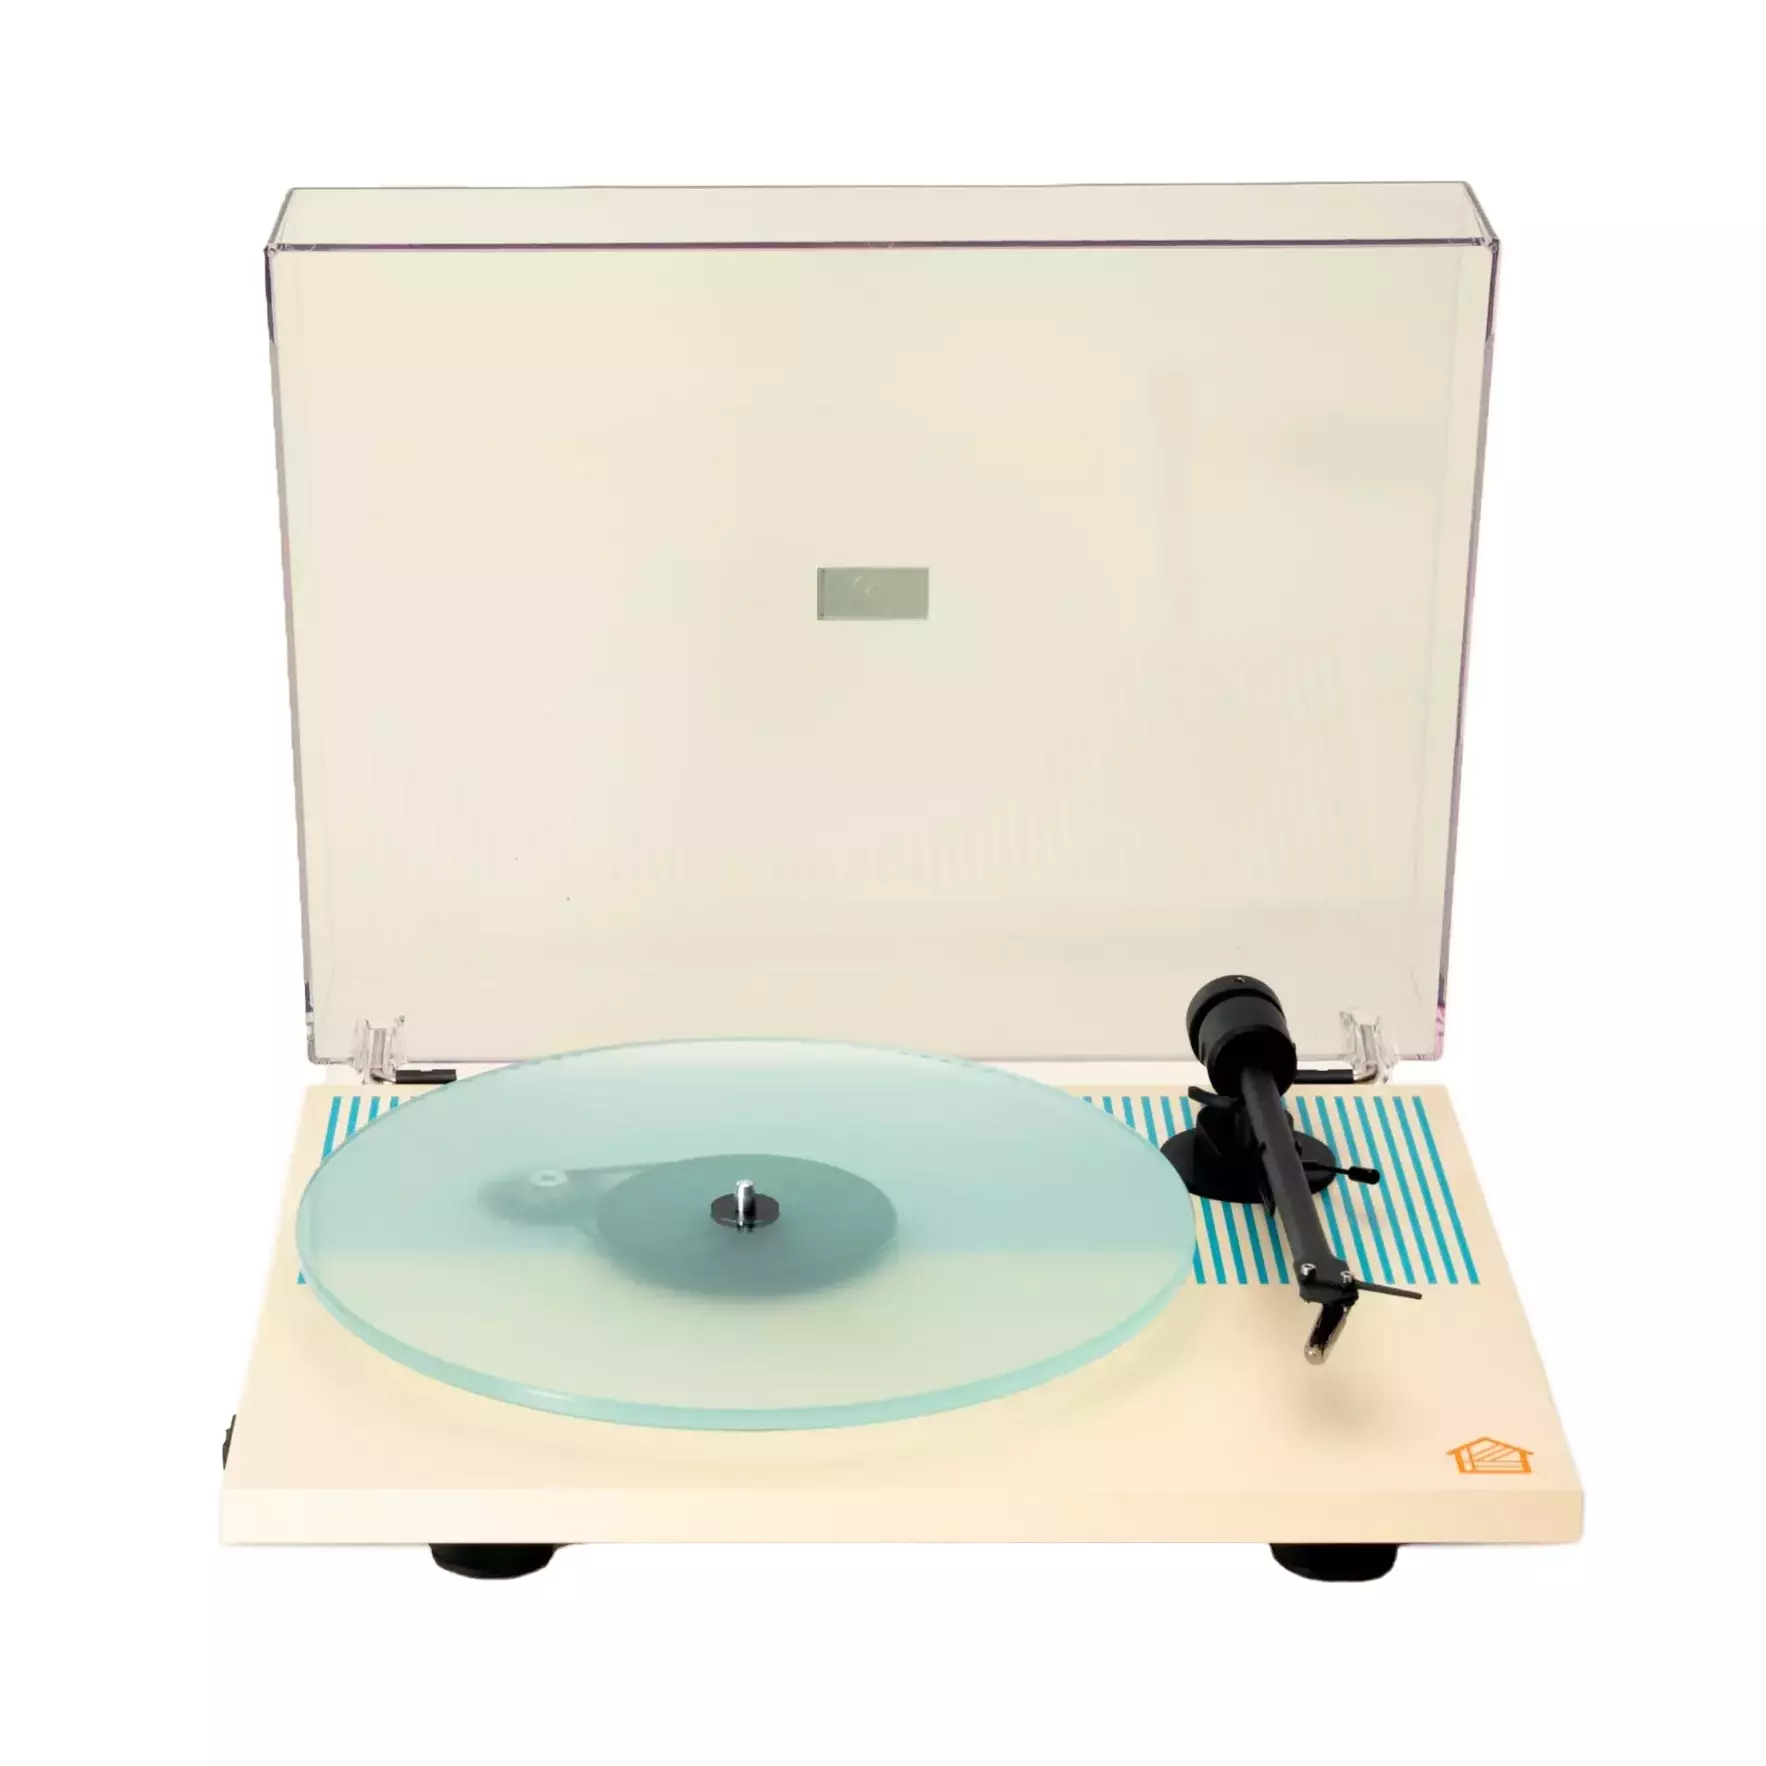 Houseplant HP1 Pro-Ject record player